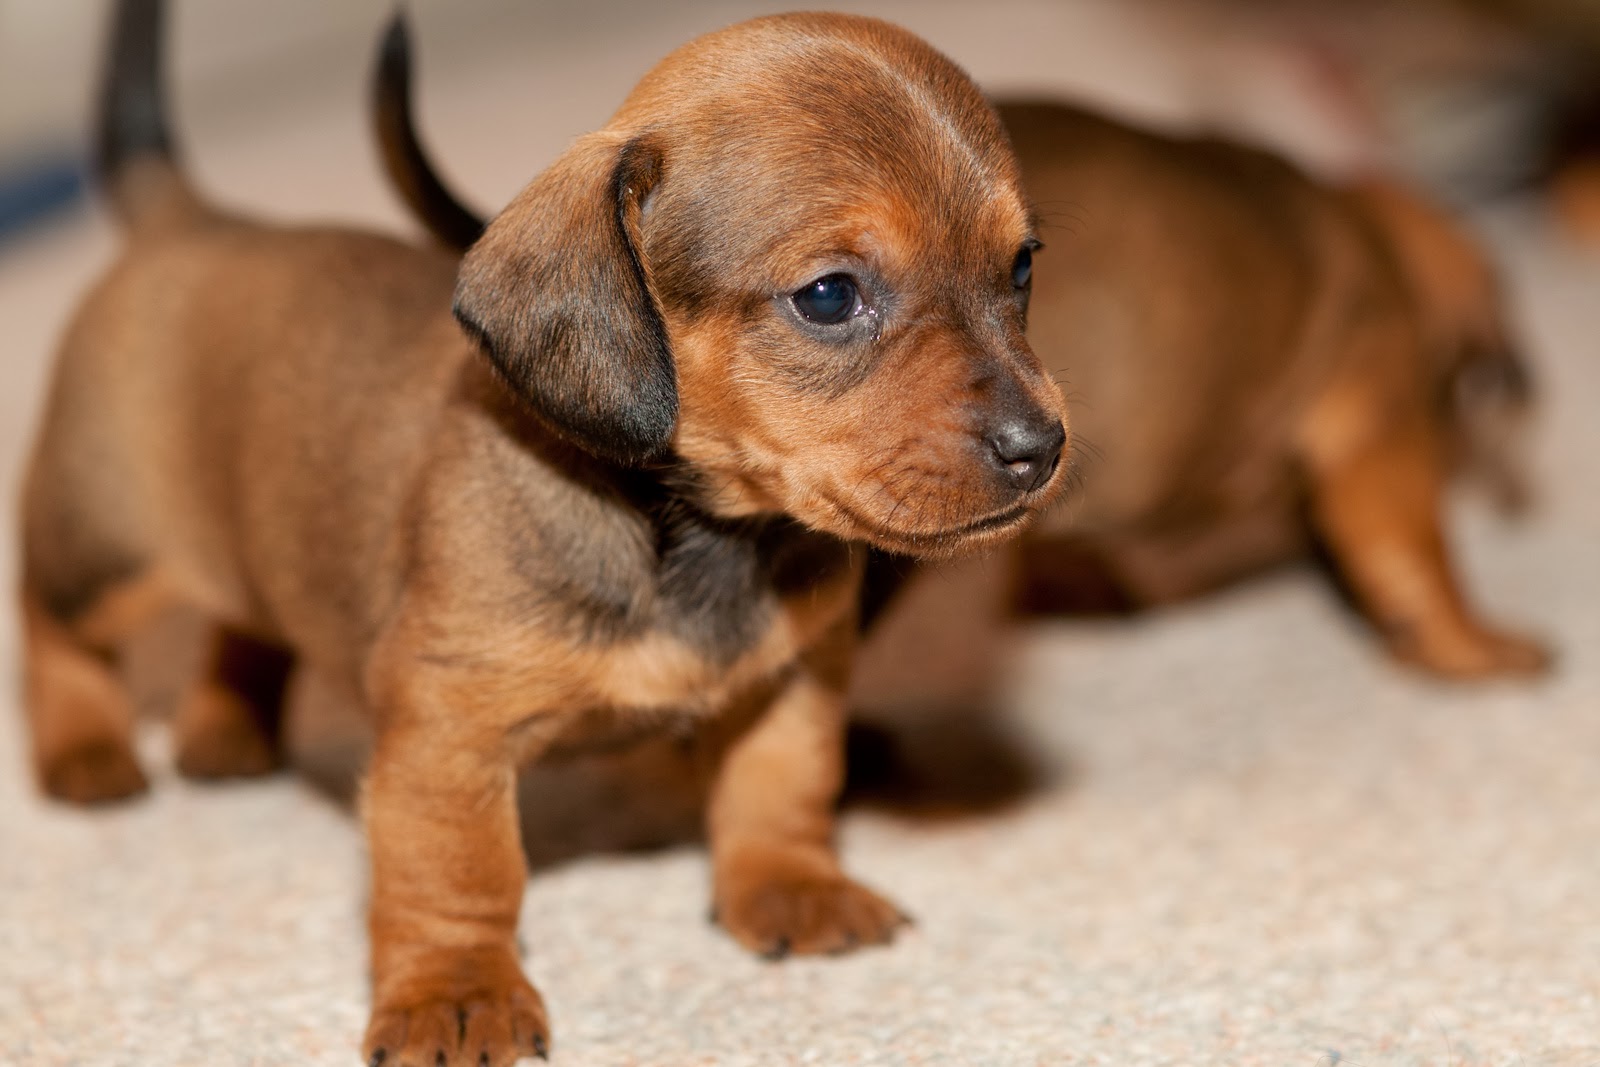 ... puppies-pictures-and-wallpapers-dachshund-small-breeds-dogs-cute-and